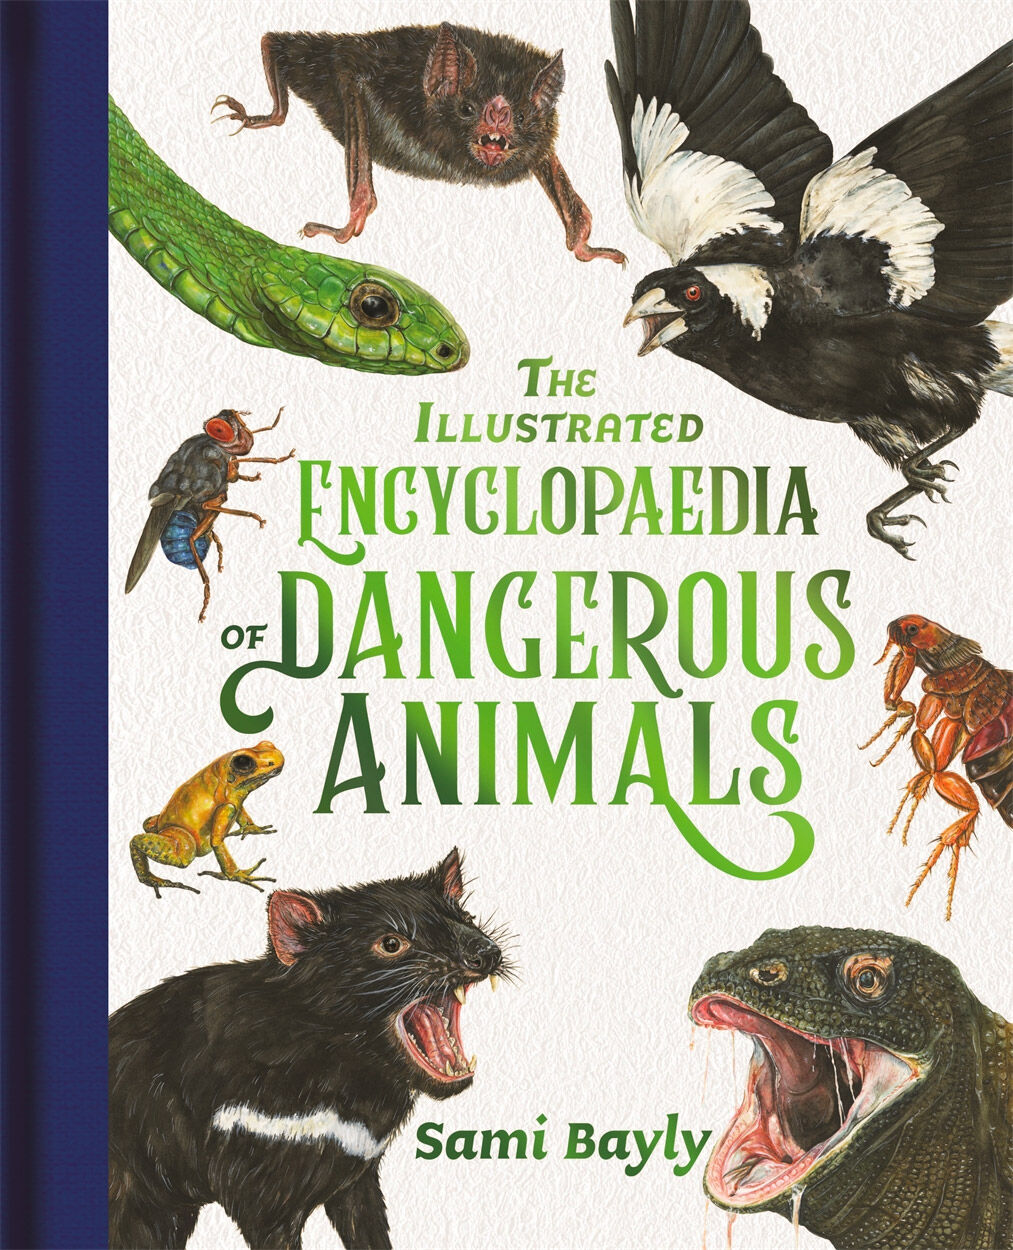 The Illustrated Encyclopaedia of Dangerous Animals by Sami Bayly